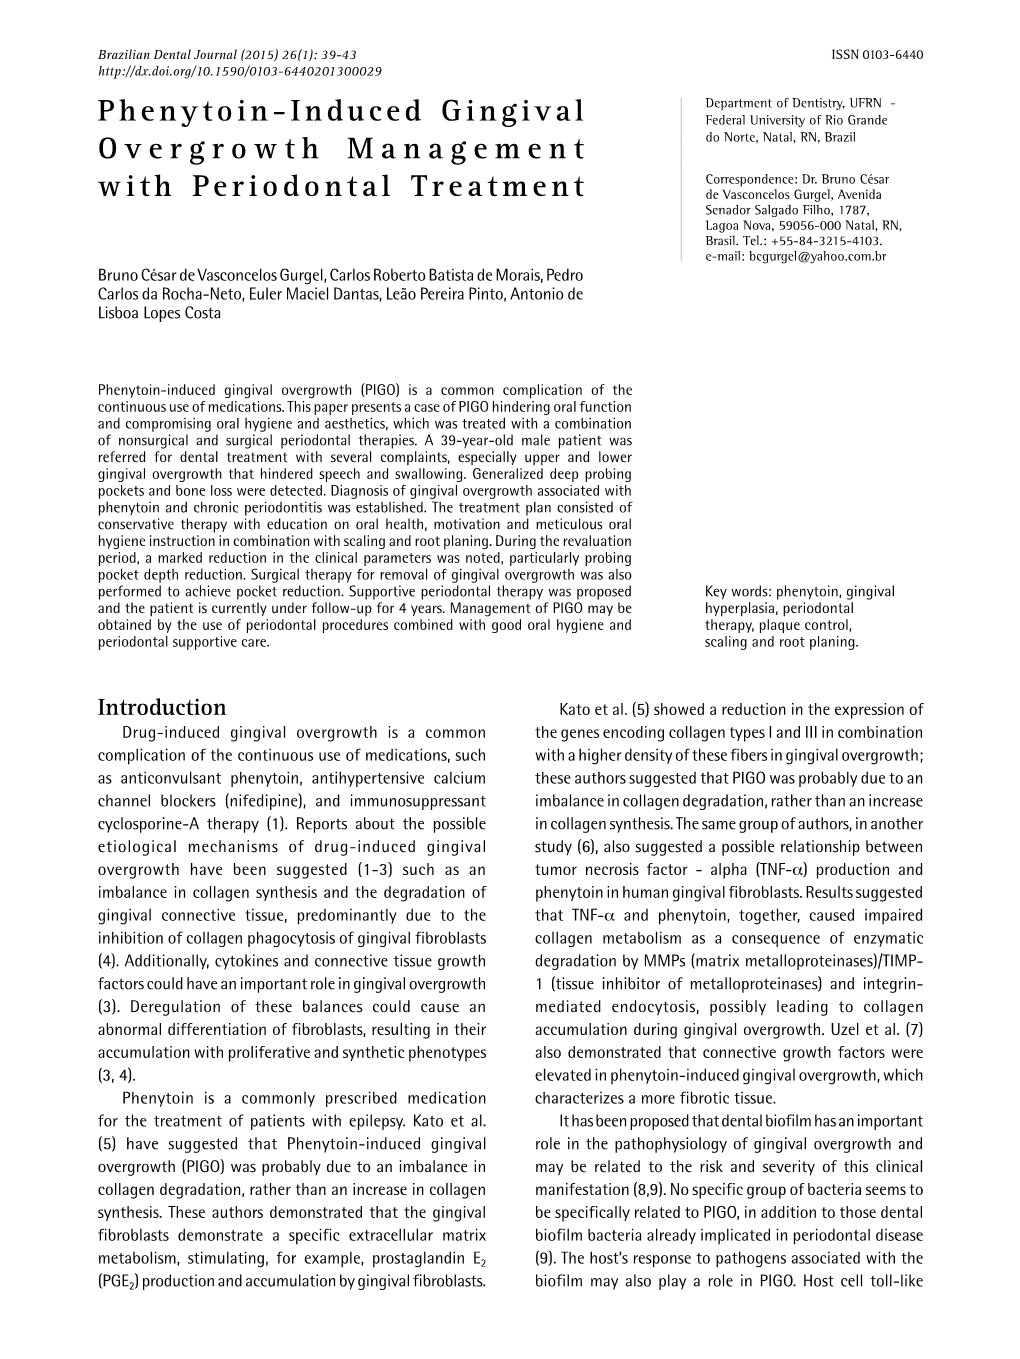 Phenytoin-Induced Gingival Overgrowth Management